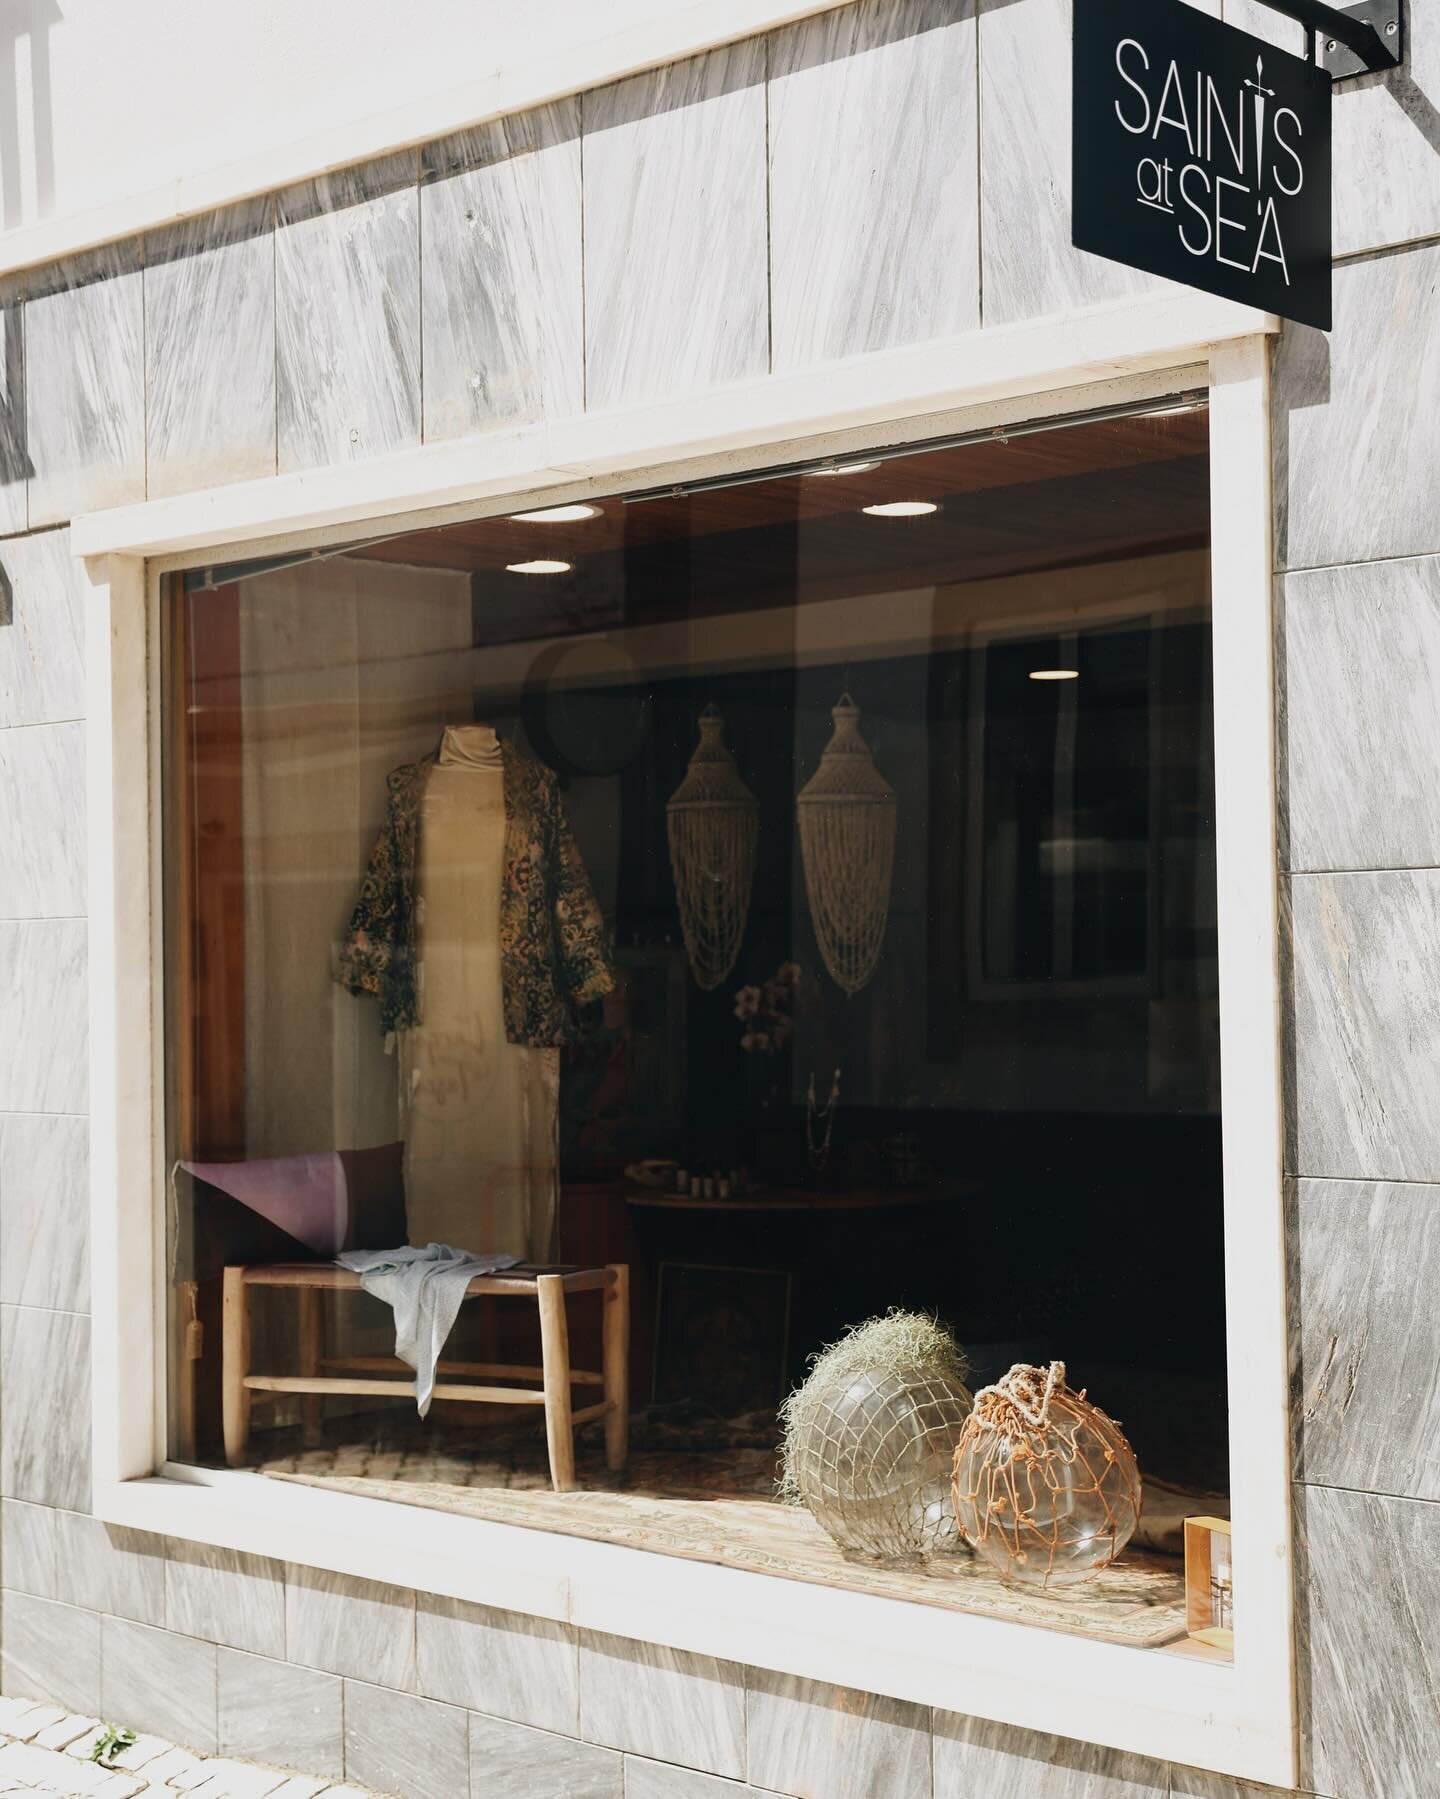 If you&rsquo;re in Ericeira, come check out our new shop featuring Saints at Sea&rsquo;s garments! We&rsquo;re just down the street from our homewear and interior design department (the Saints at Sea main store). Swing by and say hi!🌞